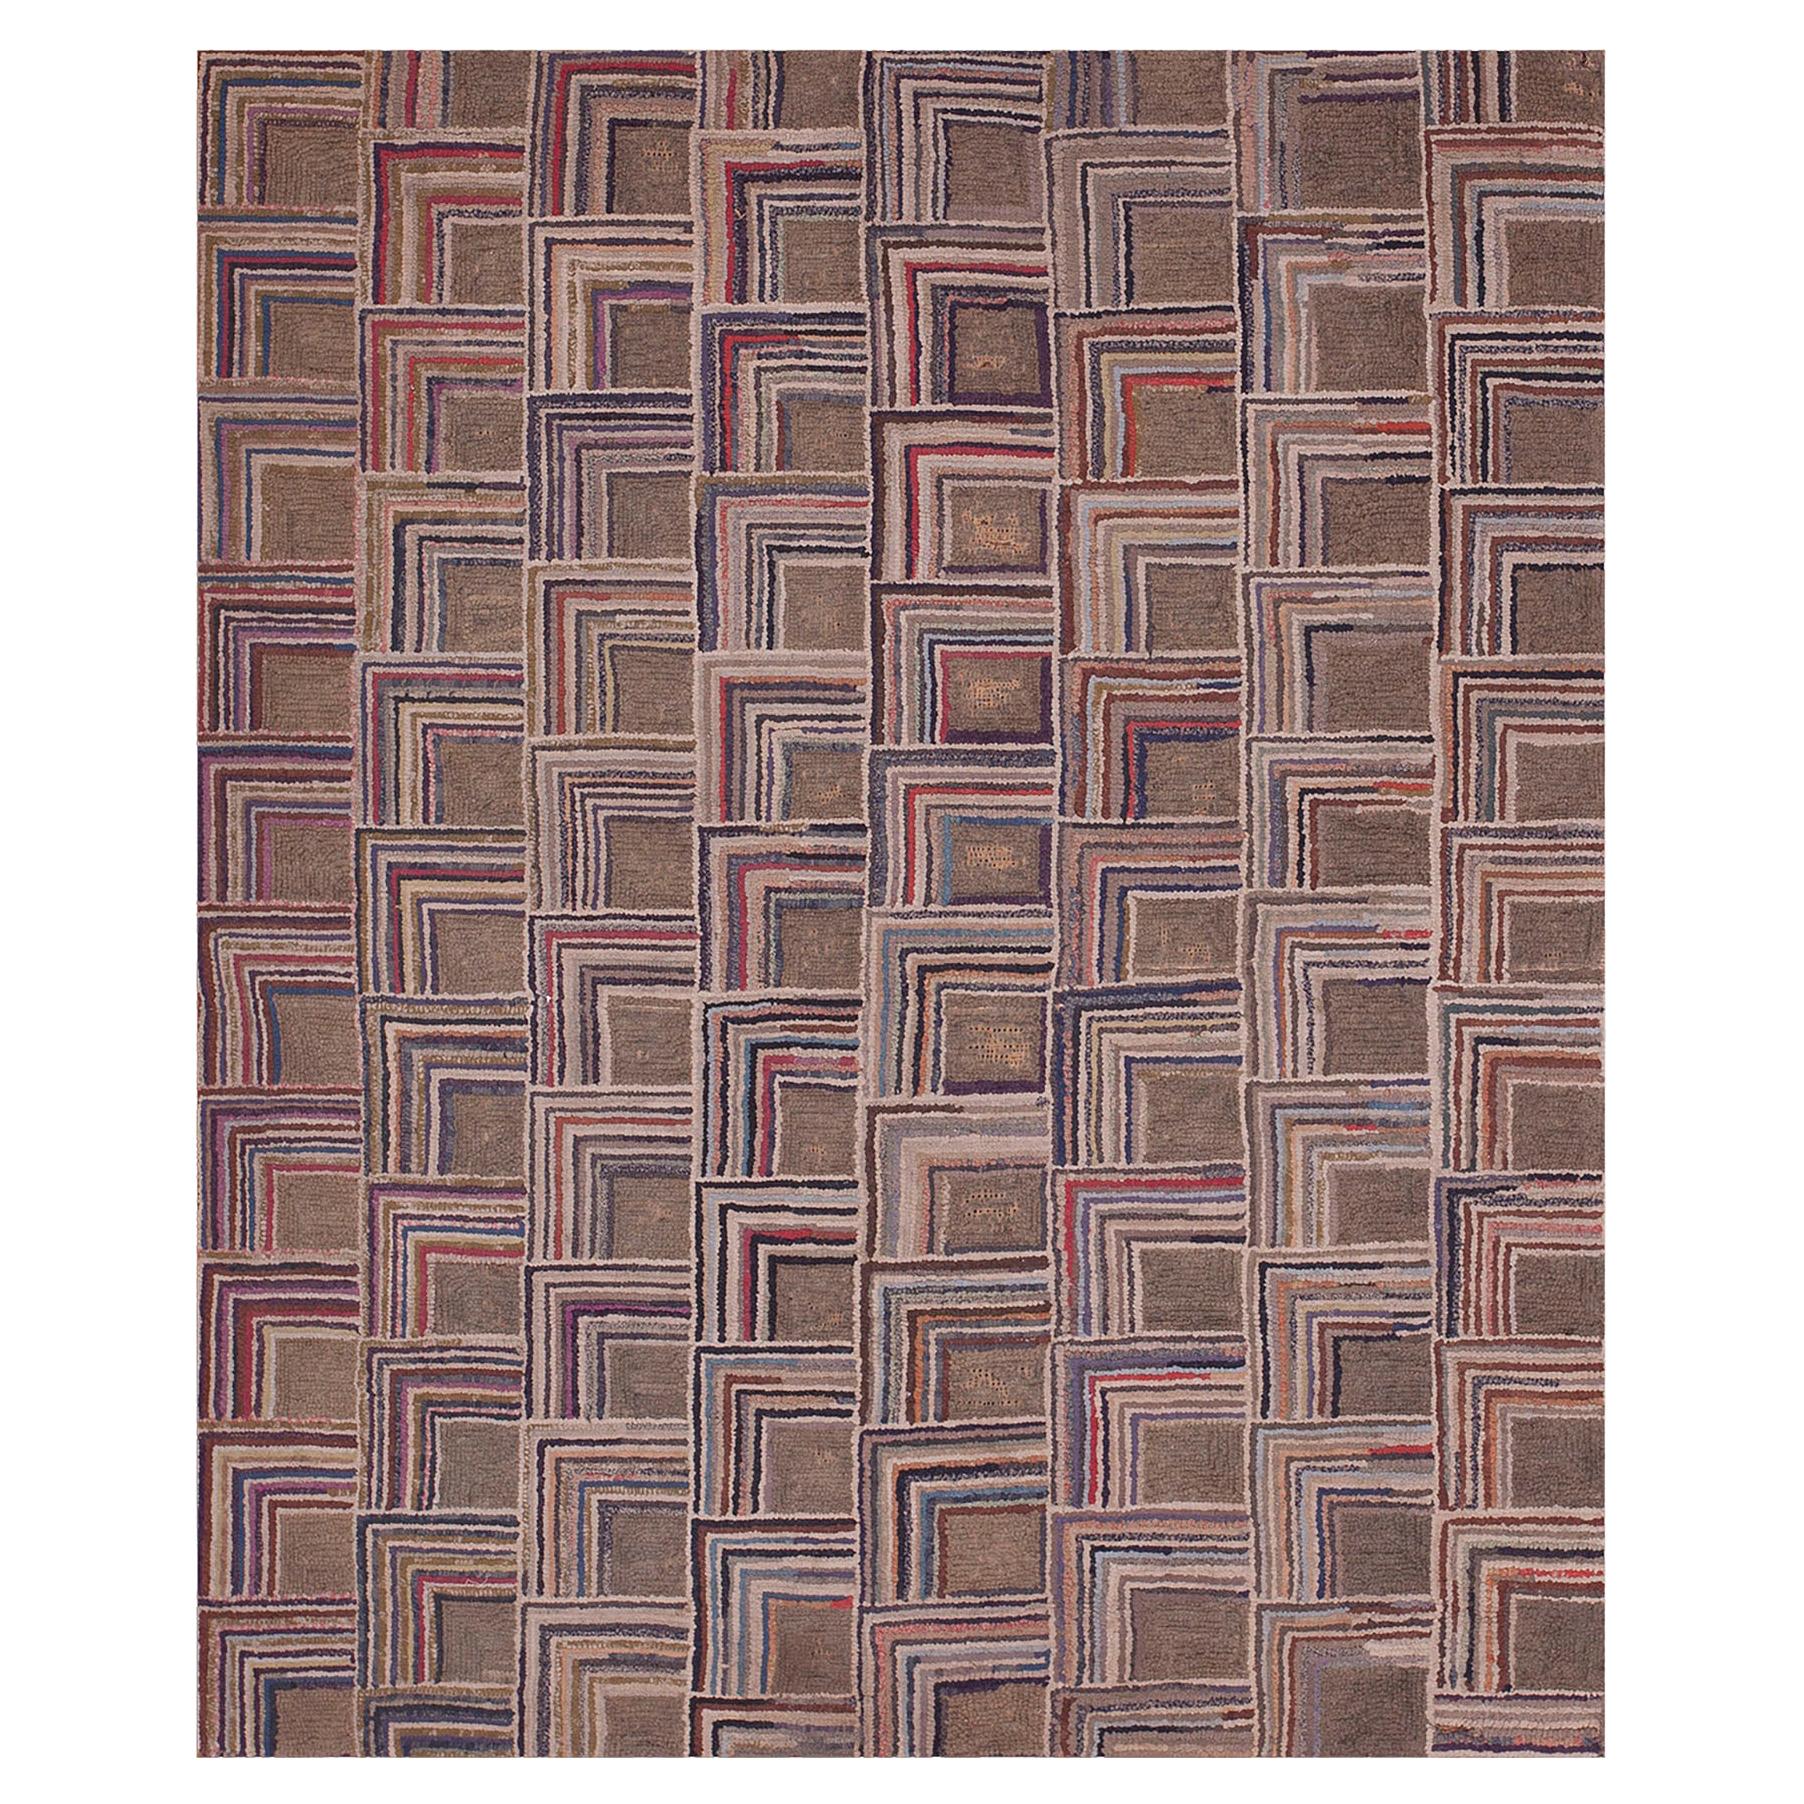 Early 20th Century American Hooked Rug ( 4'8" x 5'6" - 143 x 168 )  For Sale